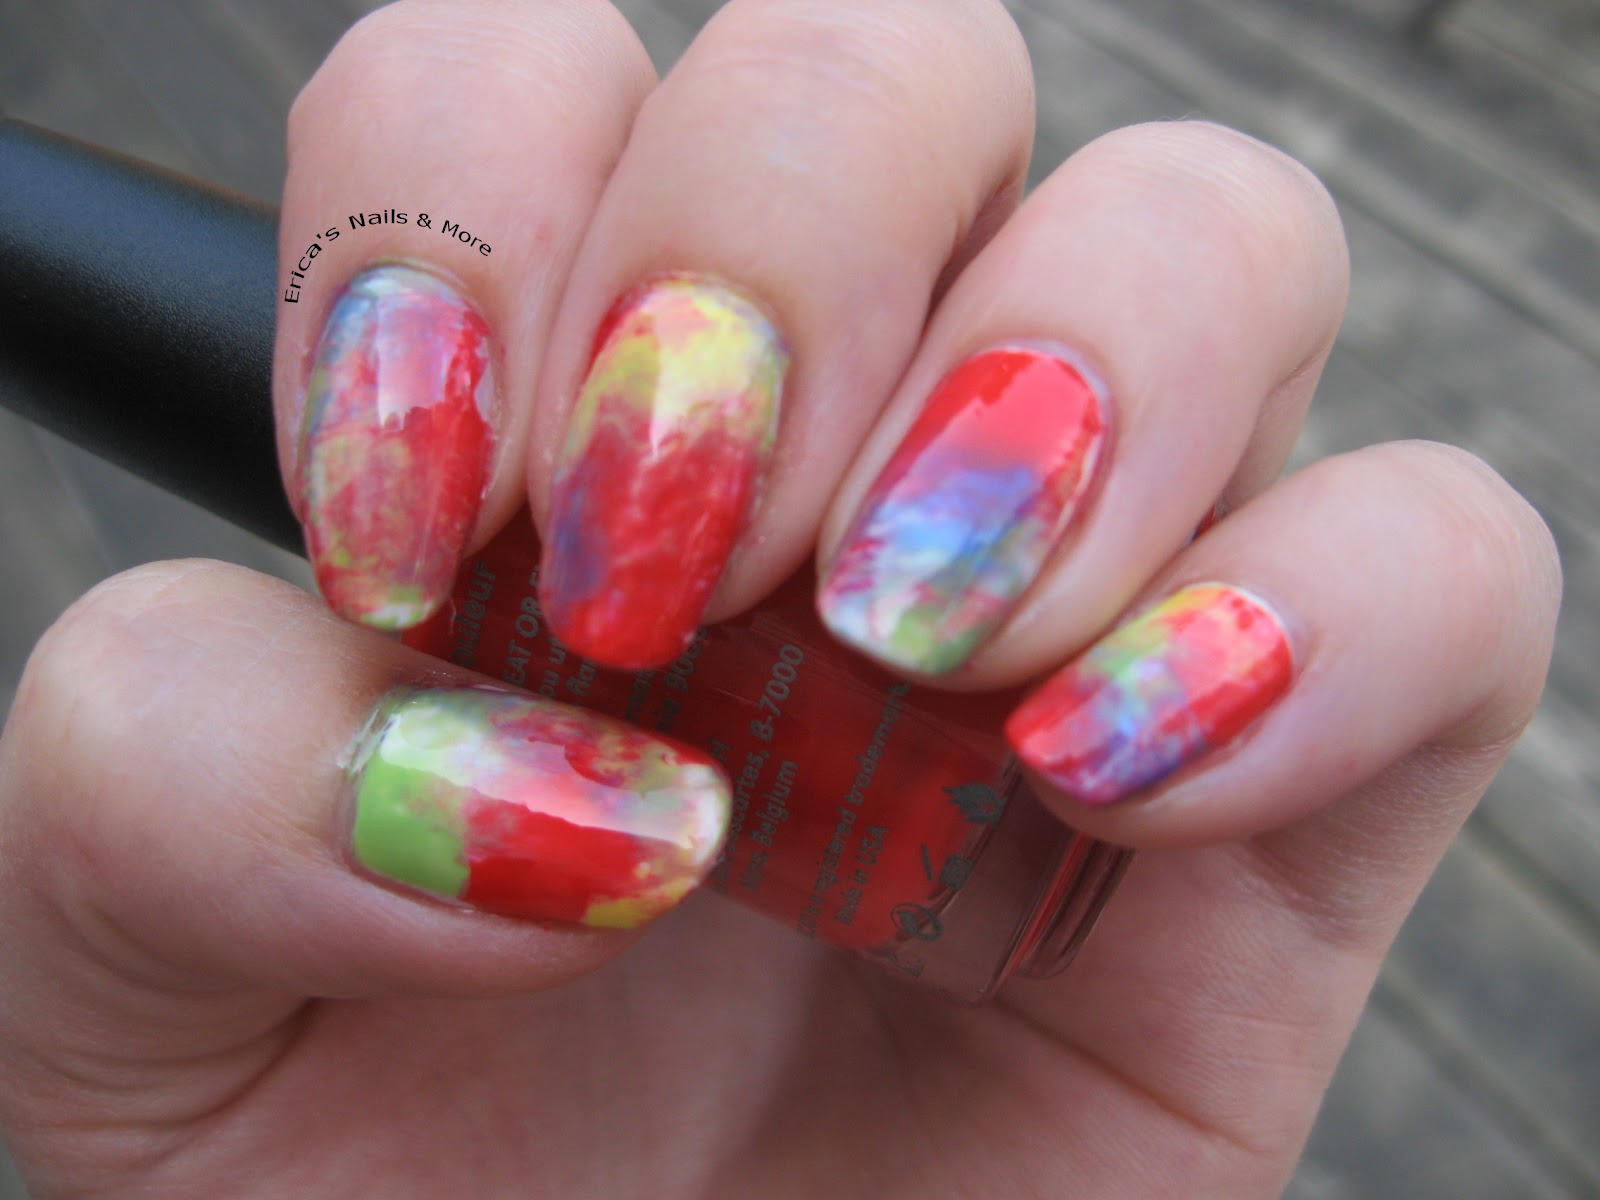 Erica's Nails and More: NOTD: Tie Dye & Peace Nail Art